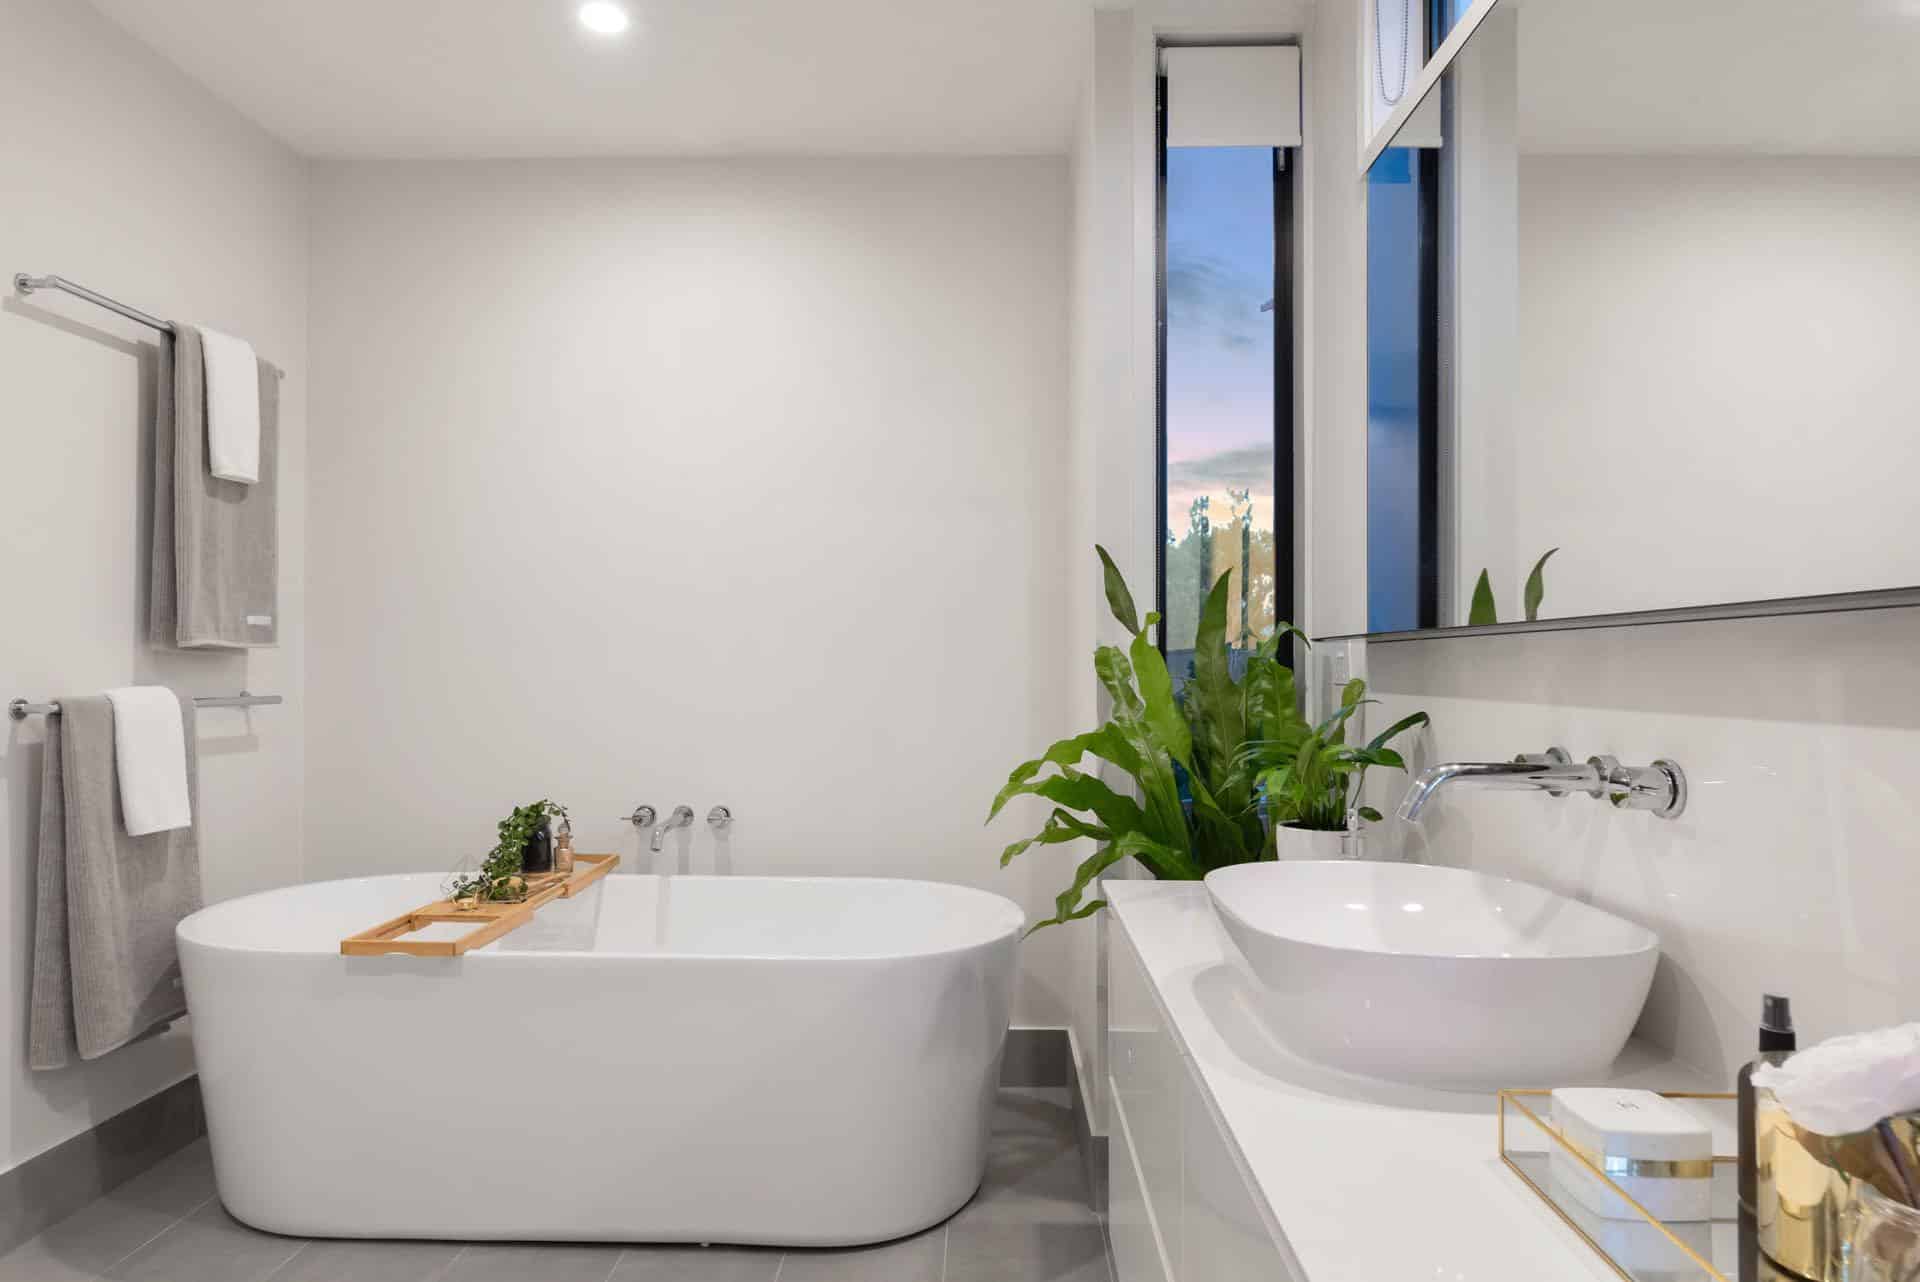 Follow These 11 Renovation Tips When Updating Your Bathroom